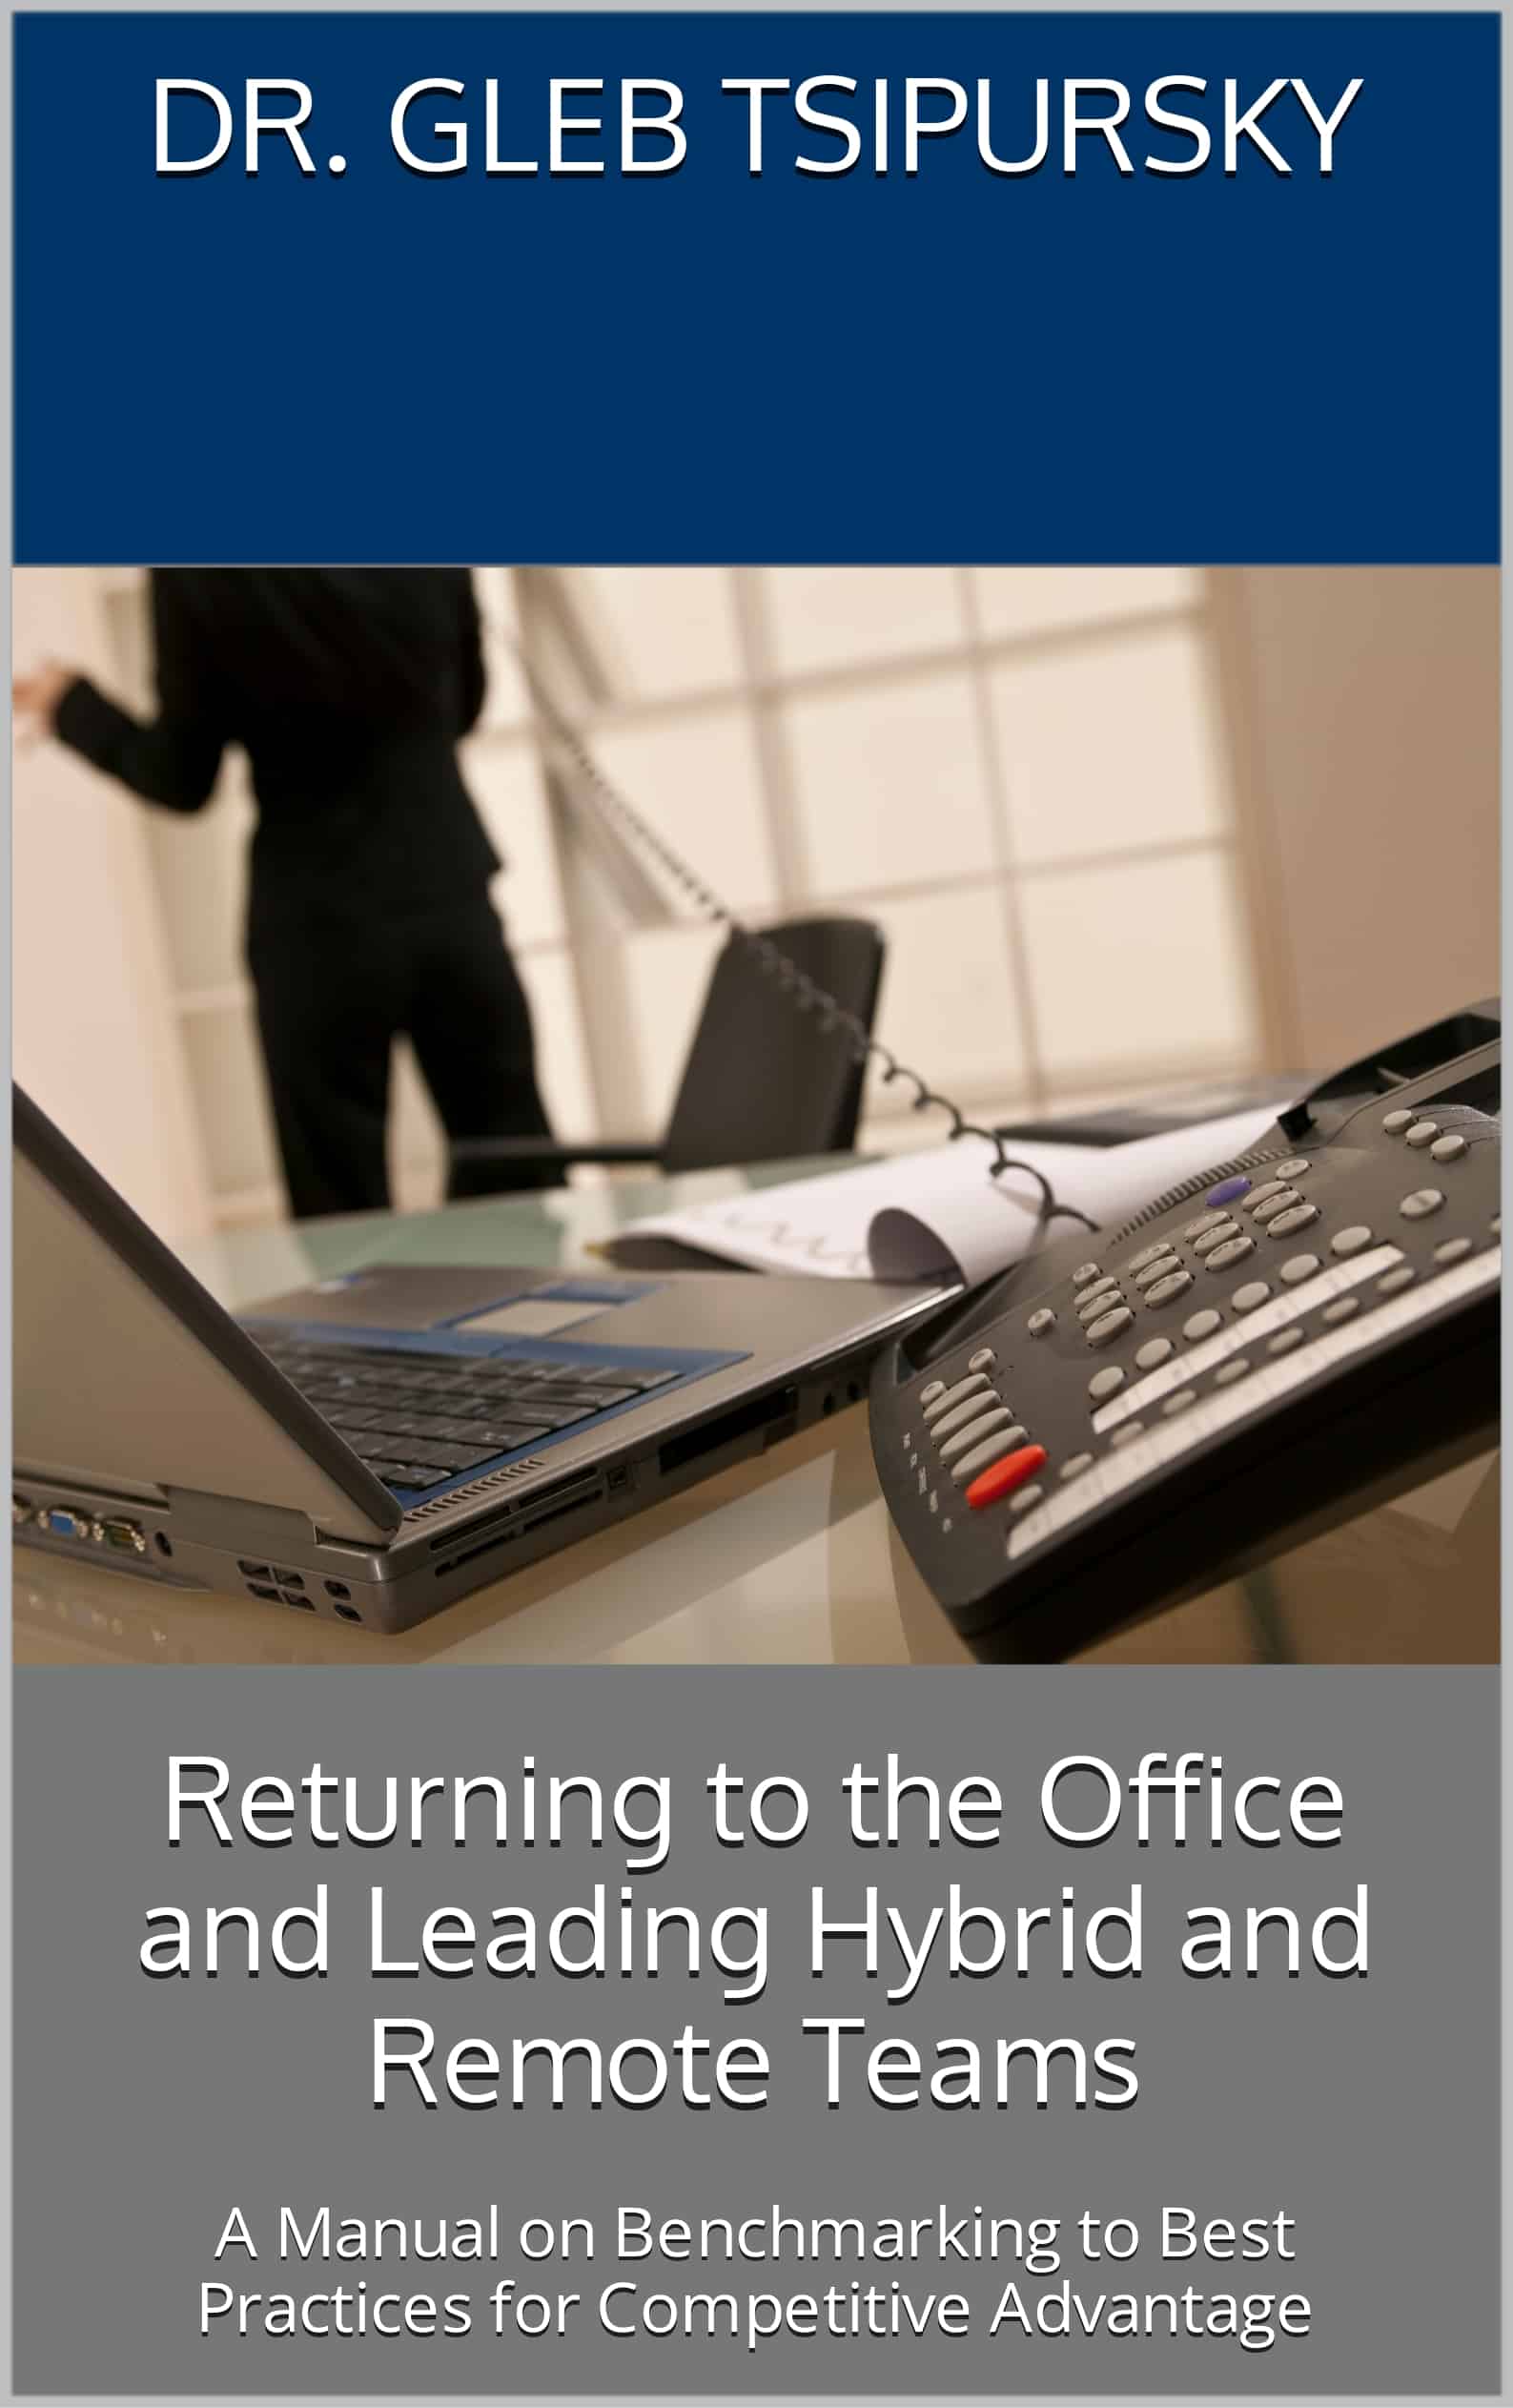 Book Cover - Returning to the Office and Leading Hybrid and Remote Teams